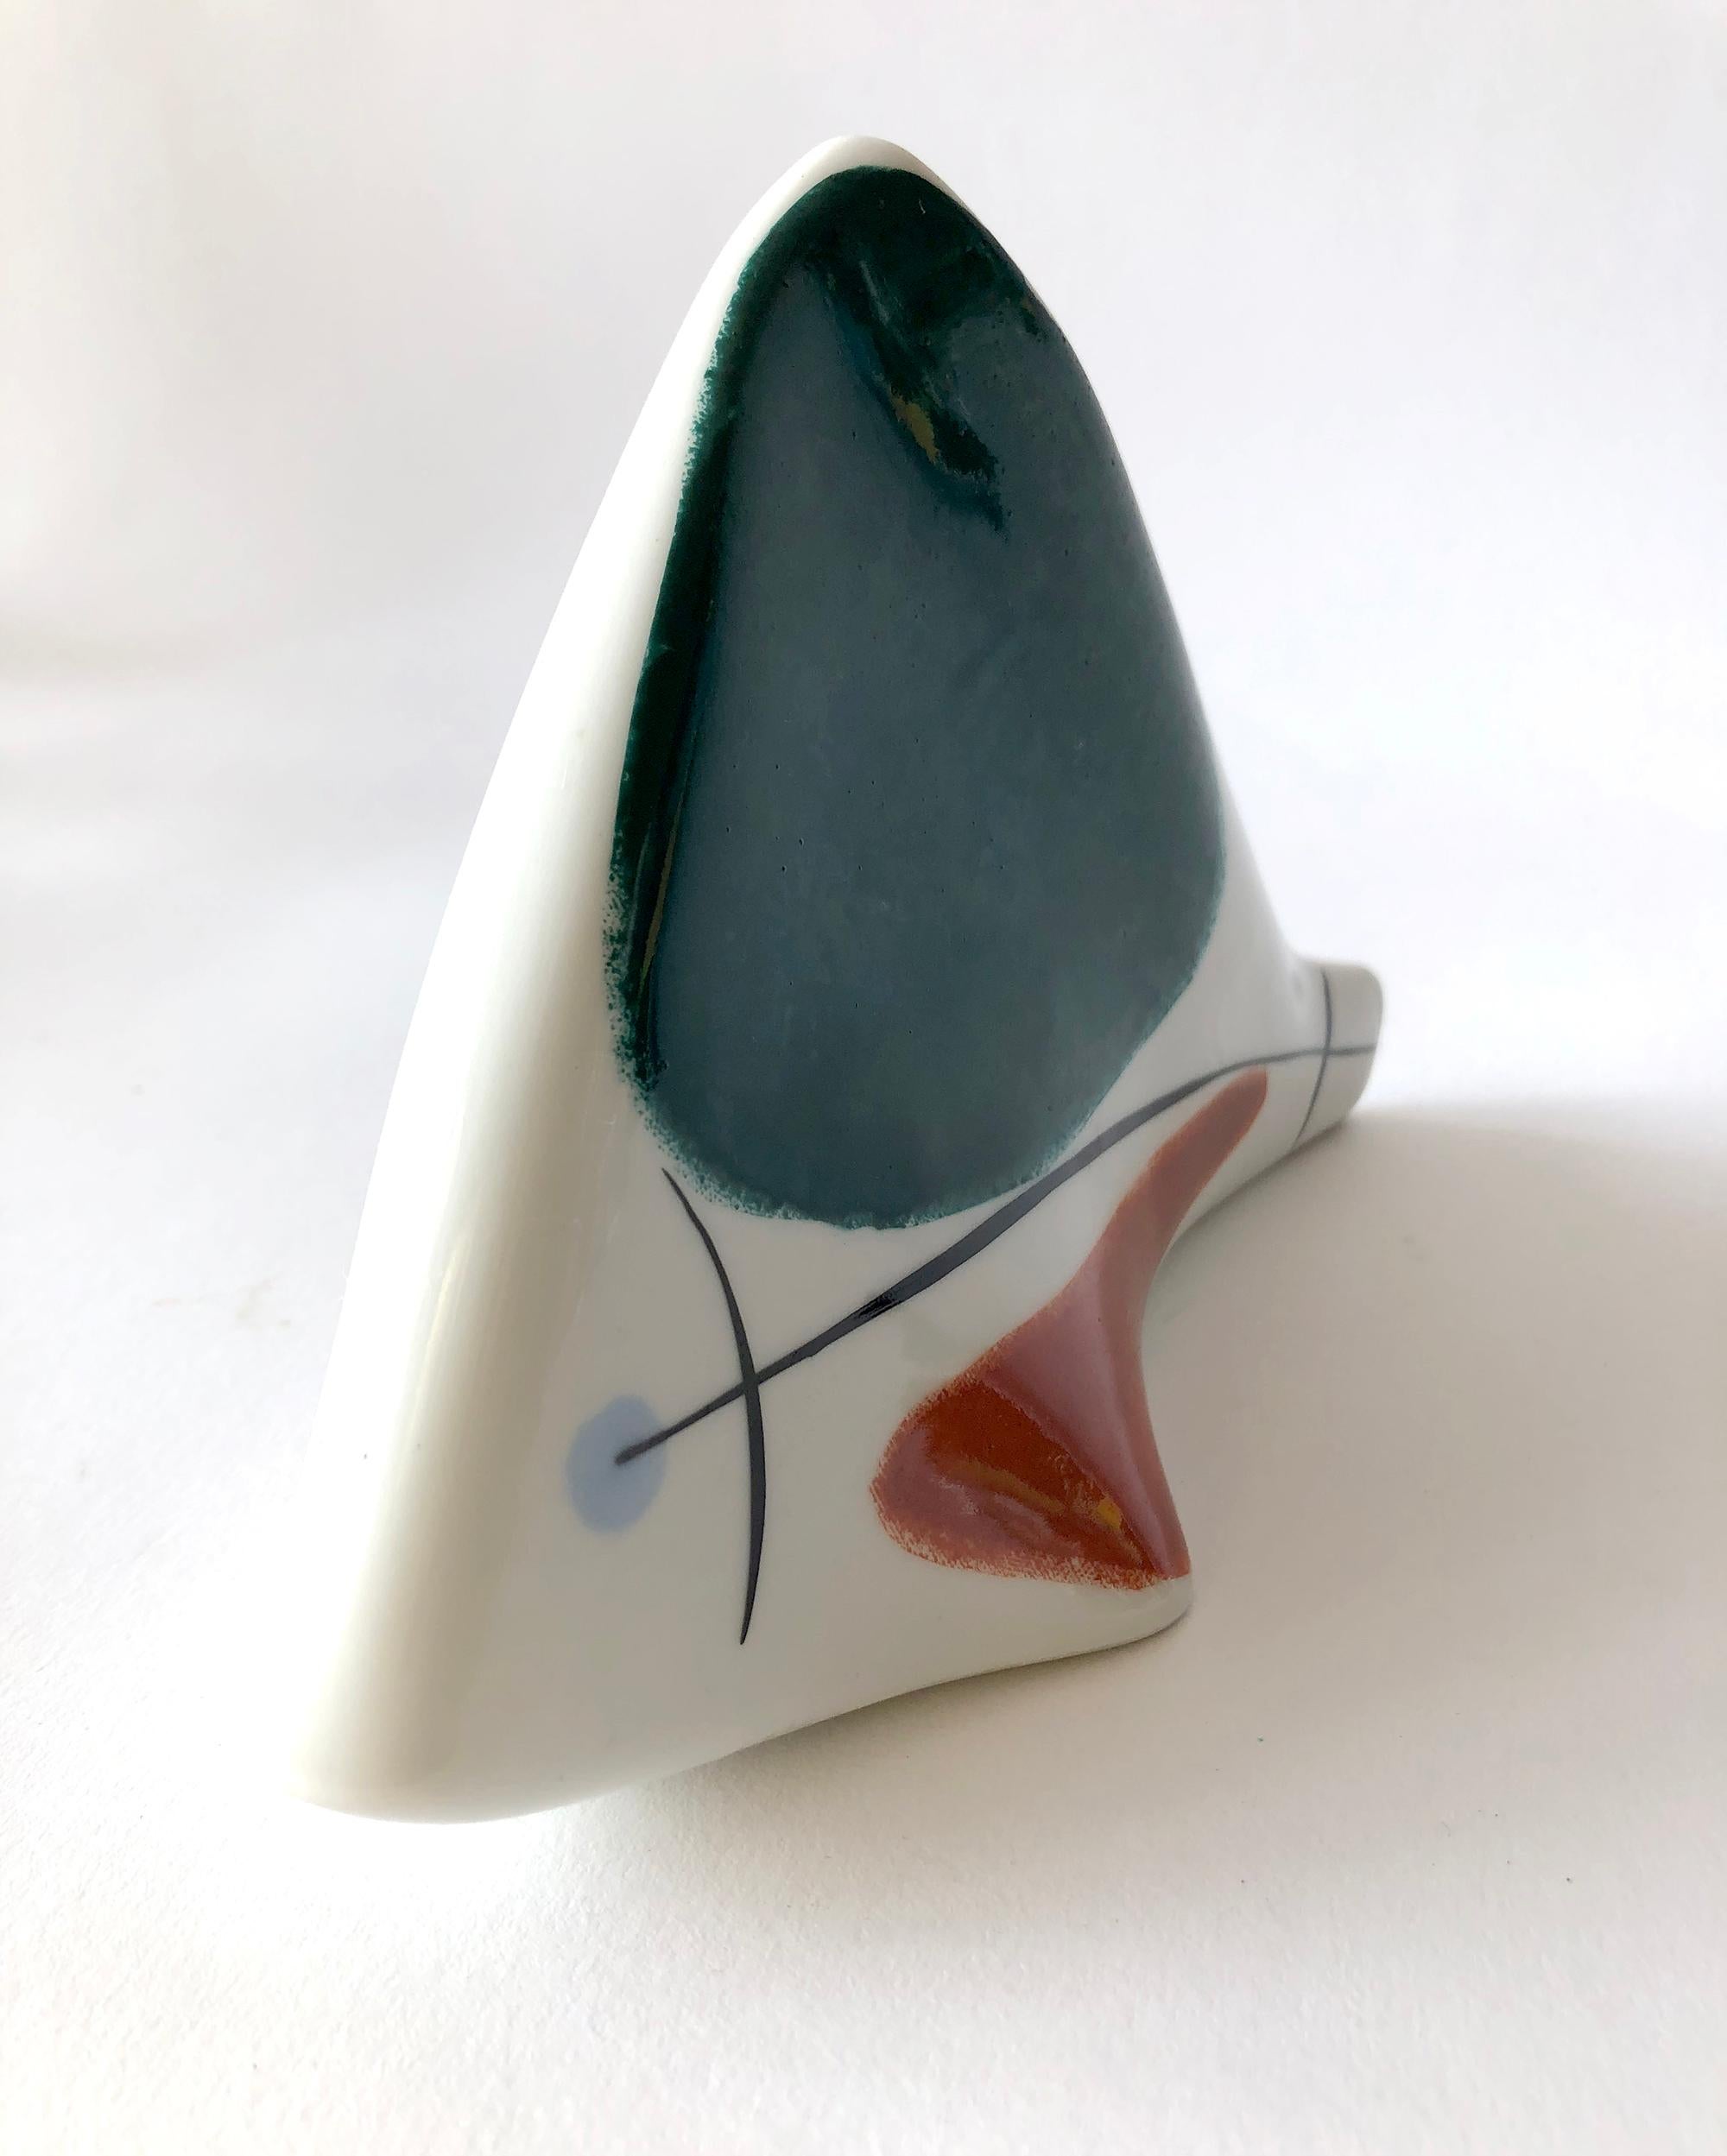 European modernist porcelain fish sculpture created in the 1950s. Fish measures 4.5